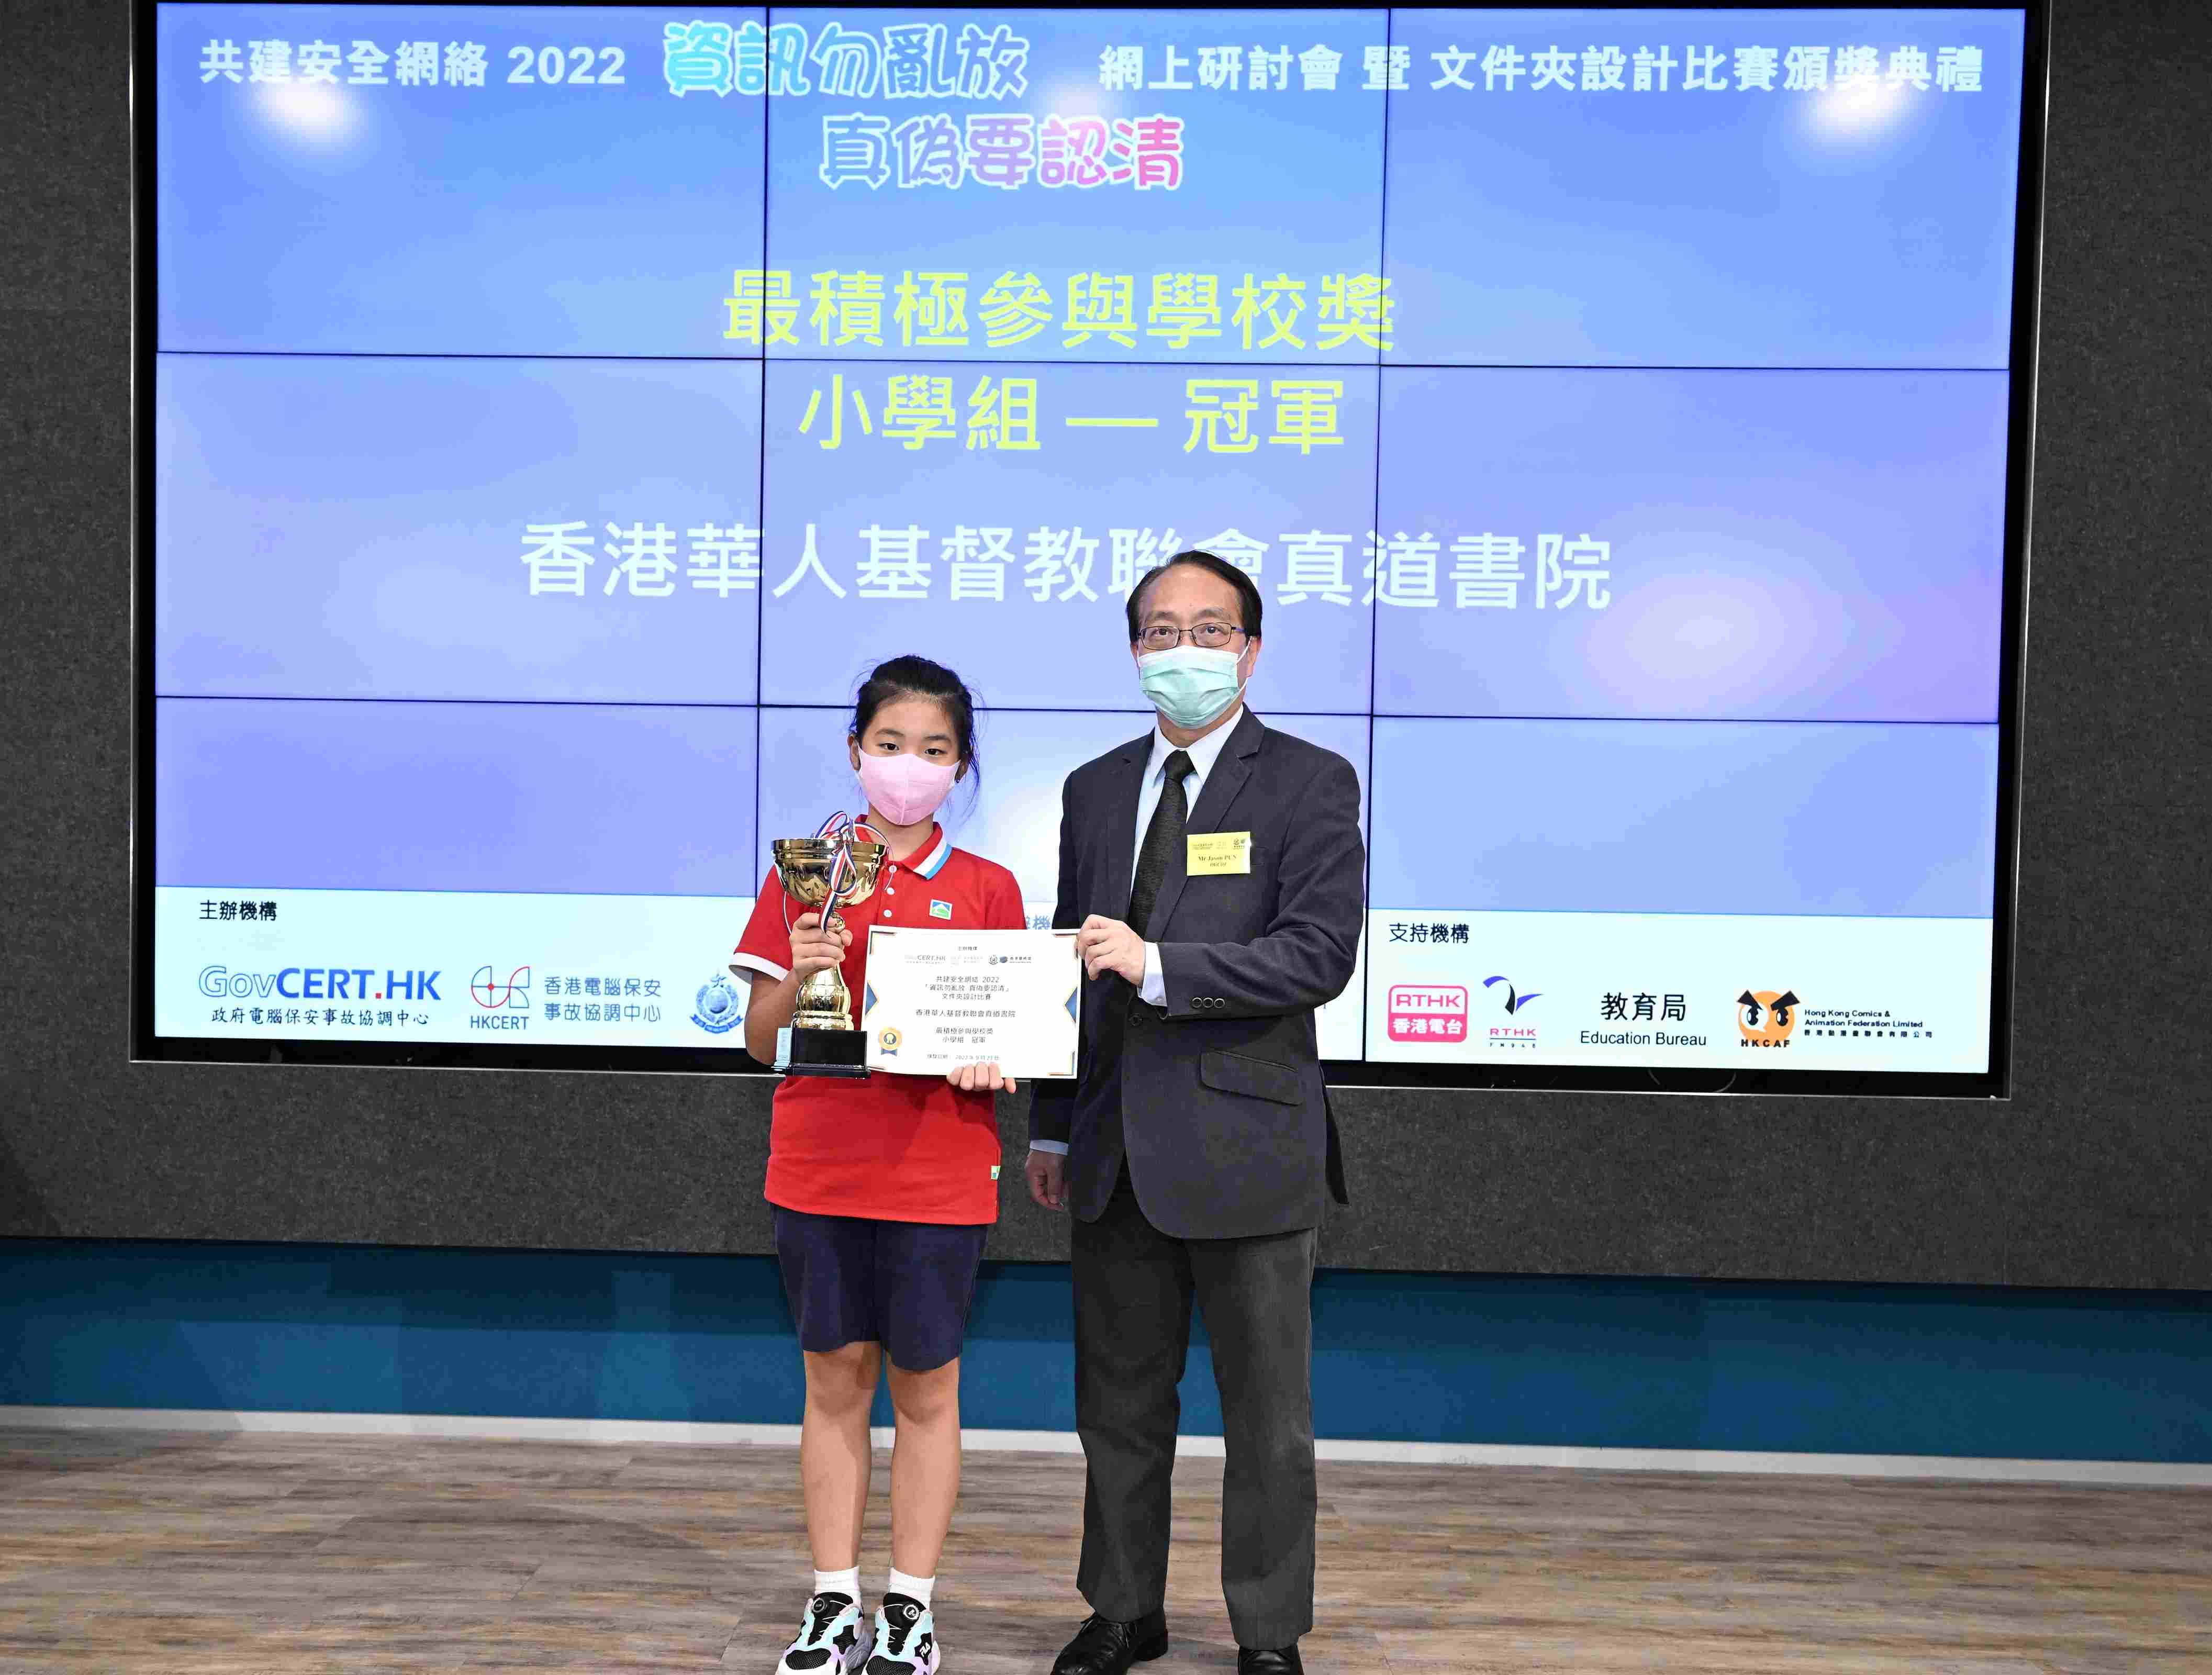 Champion of Most Supportive School Award (Primary School Group) - The Hong Kong Chinese Christian Churches Union Logos Academy